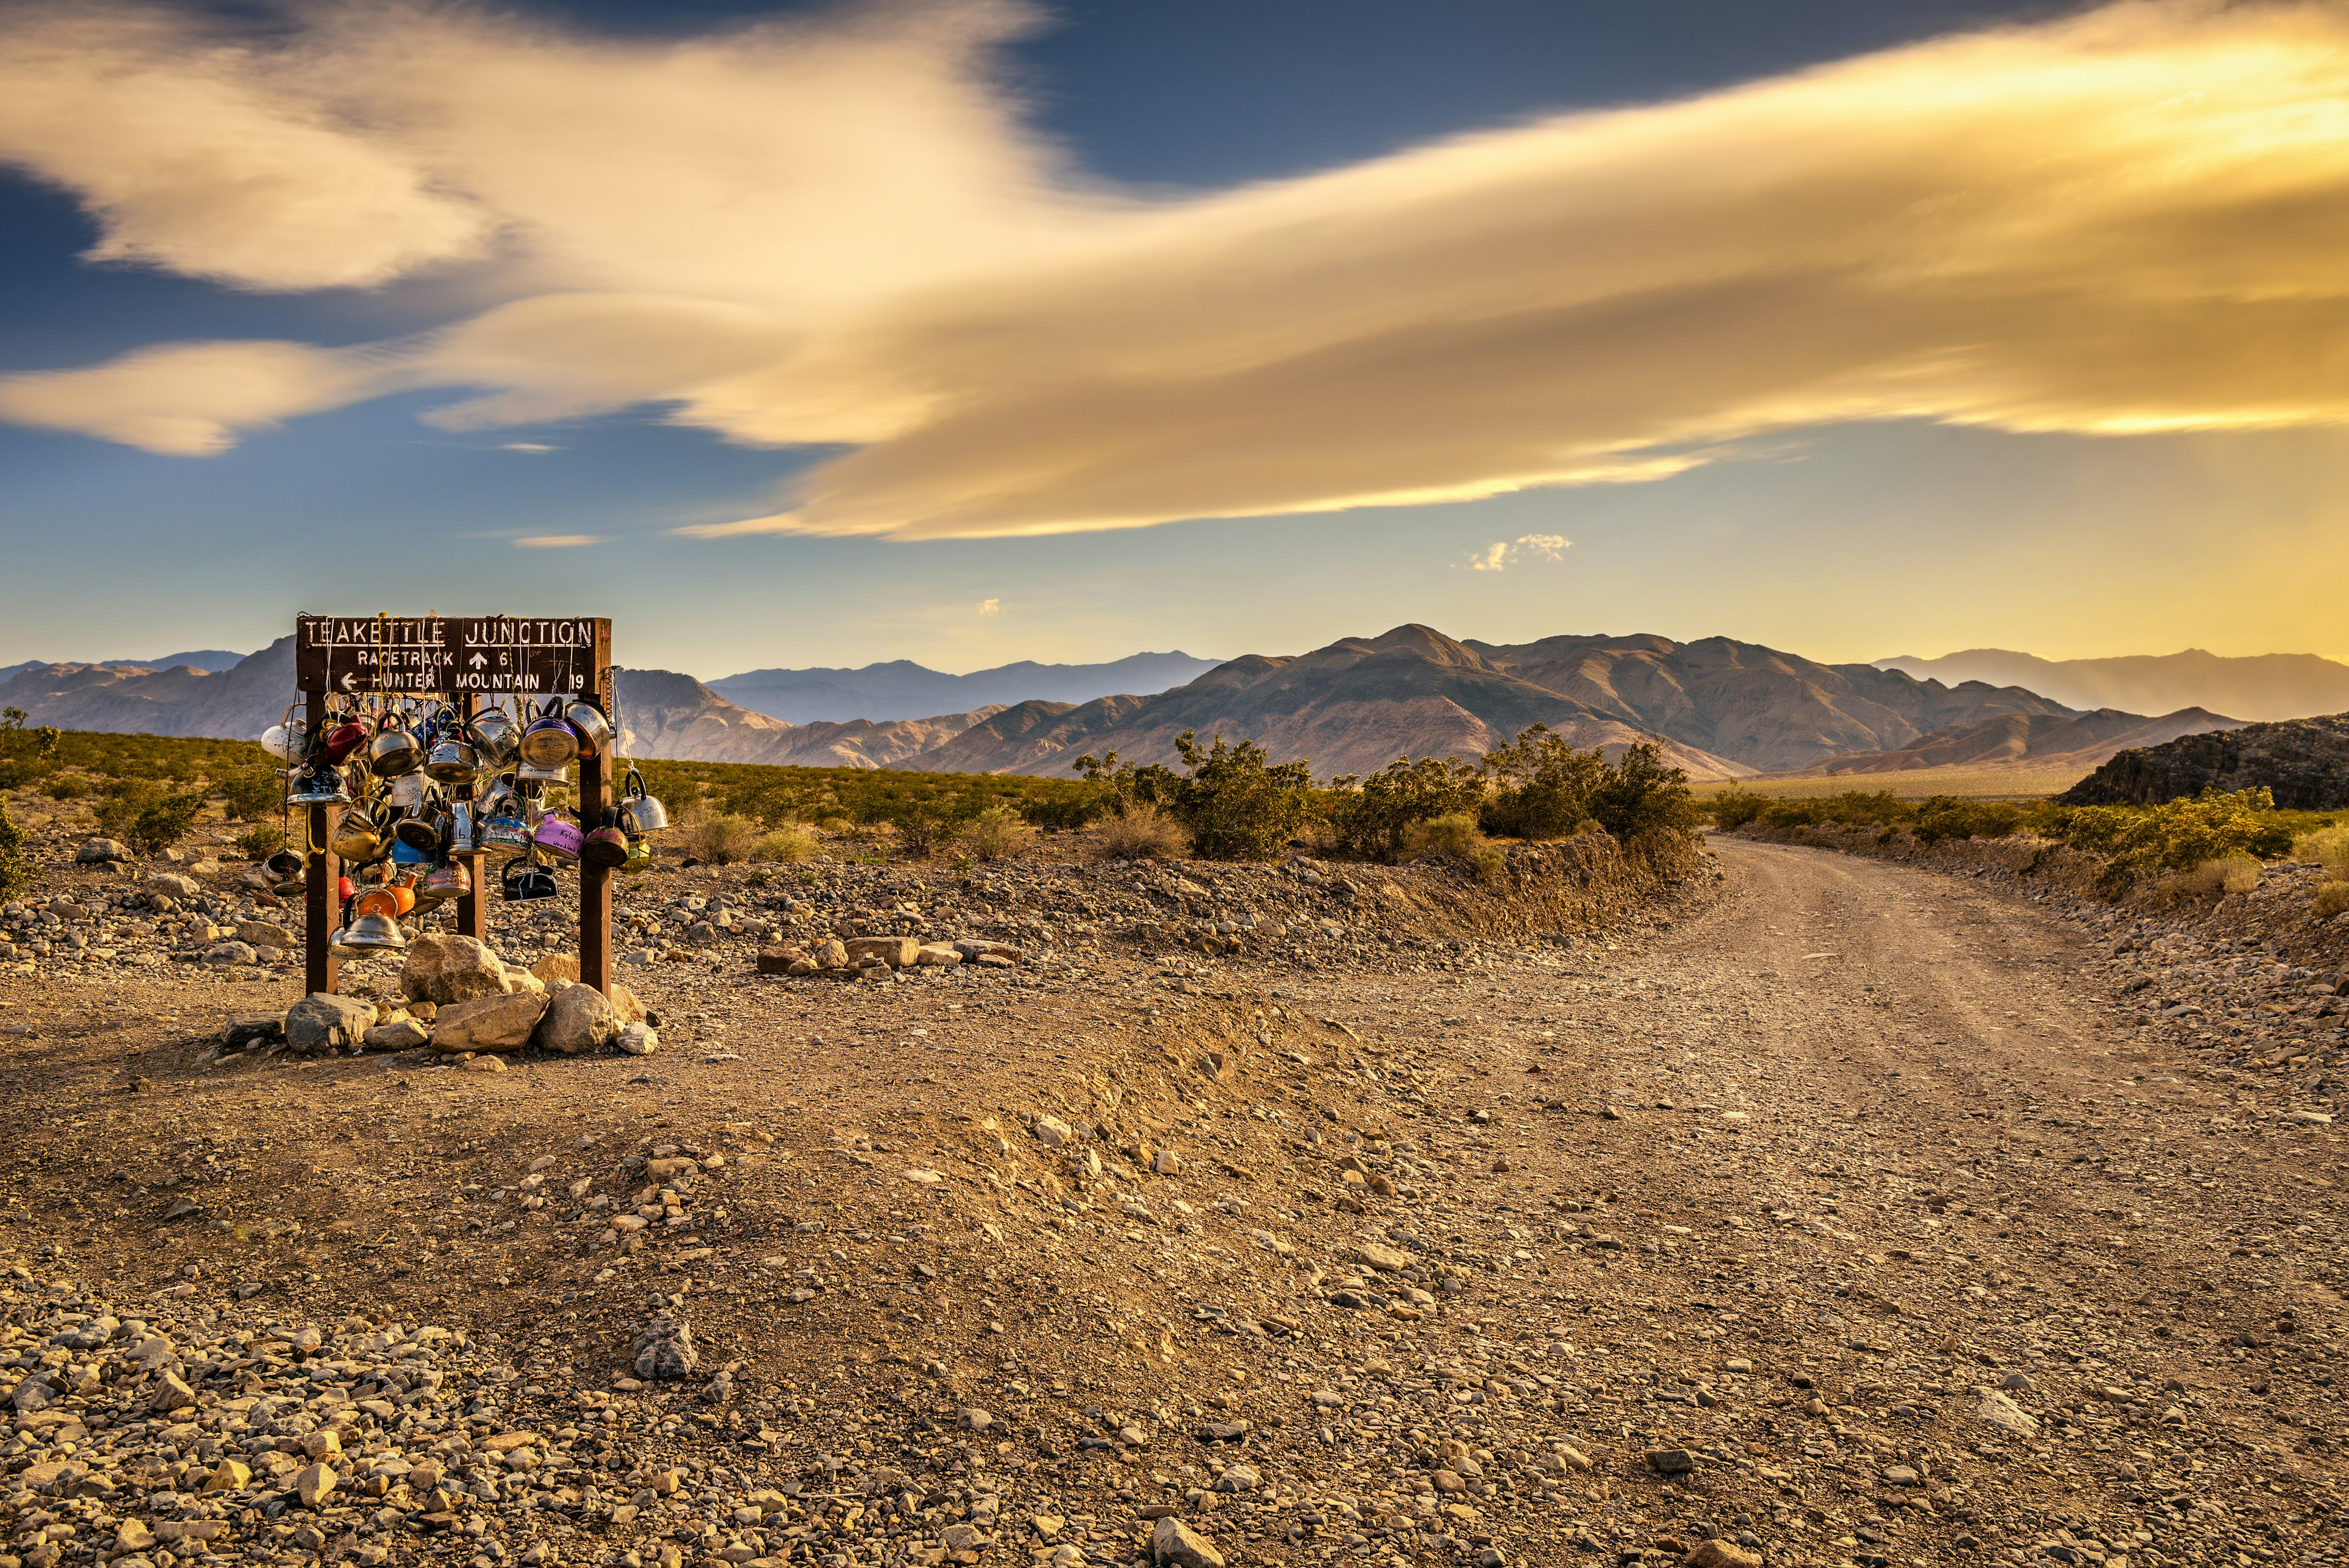 The golden expanse of Death Valley's rocky, sandy flats surround a worn wooden sign reading "Teakettle Junction" on which are hung numerous vintage kettle in various muted colors. A flat road winds off into to the distance towards mountains tinted blue and purple.